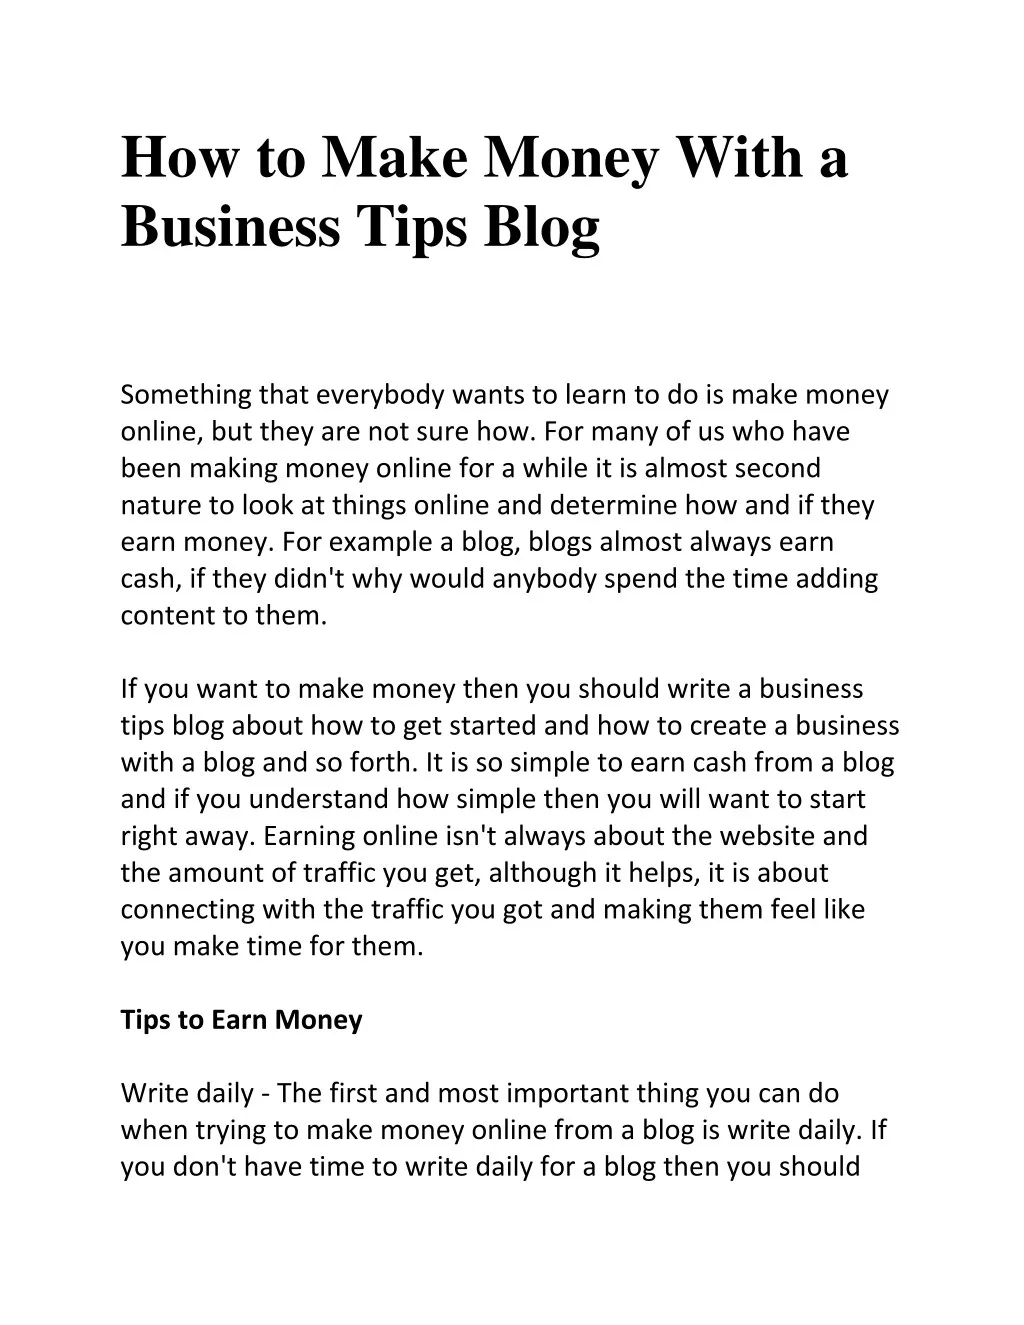 how to make money with a business tips blog